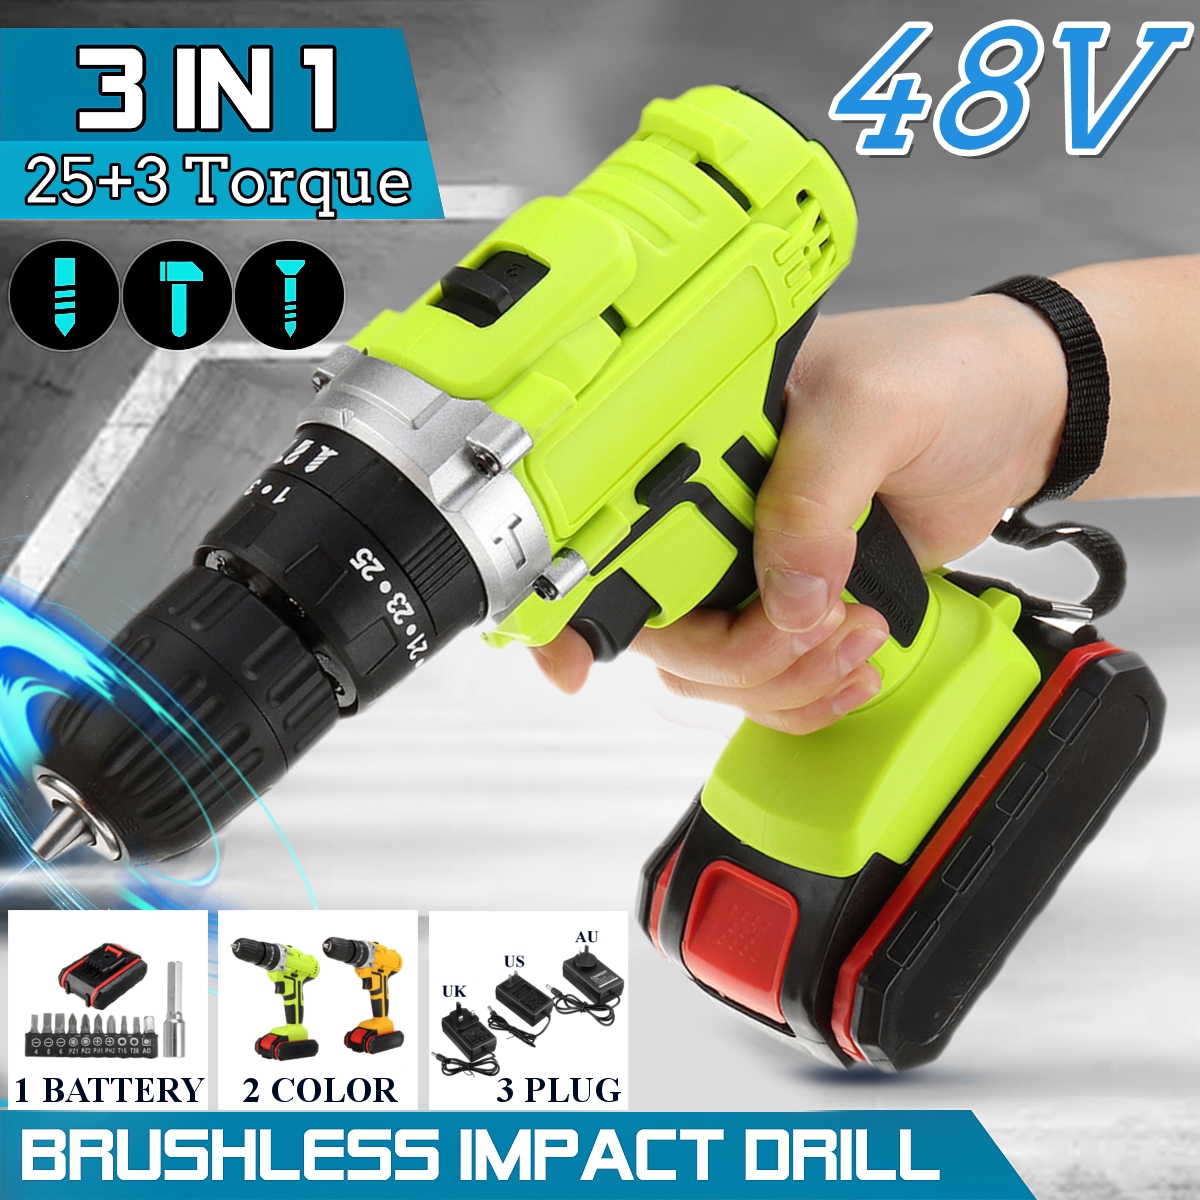 48VF-22800mAh-Cordless-Rechargable-3-In-1-Power-Drills-Impact-Electric-Drill-Driver-With-1Pcs-Batter-1877434-1